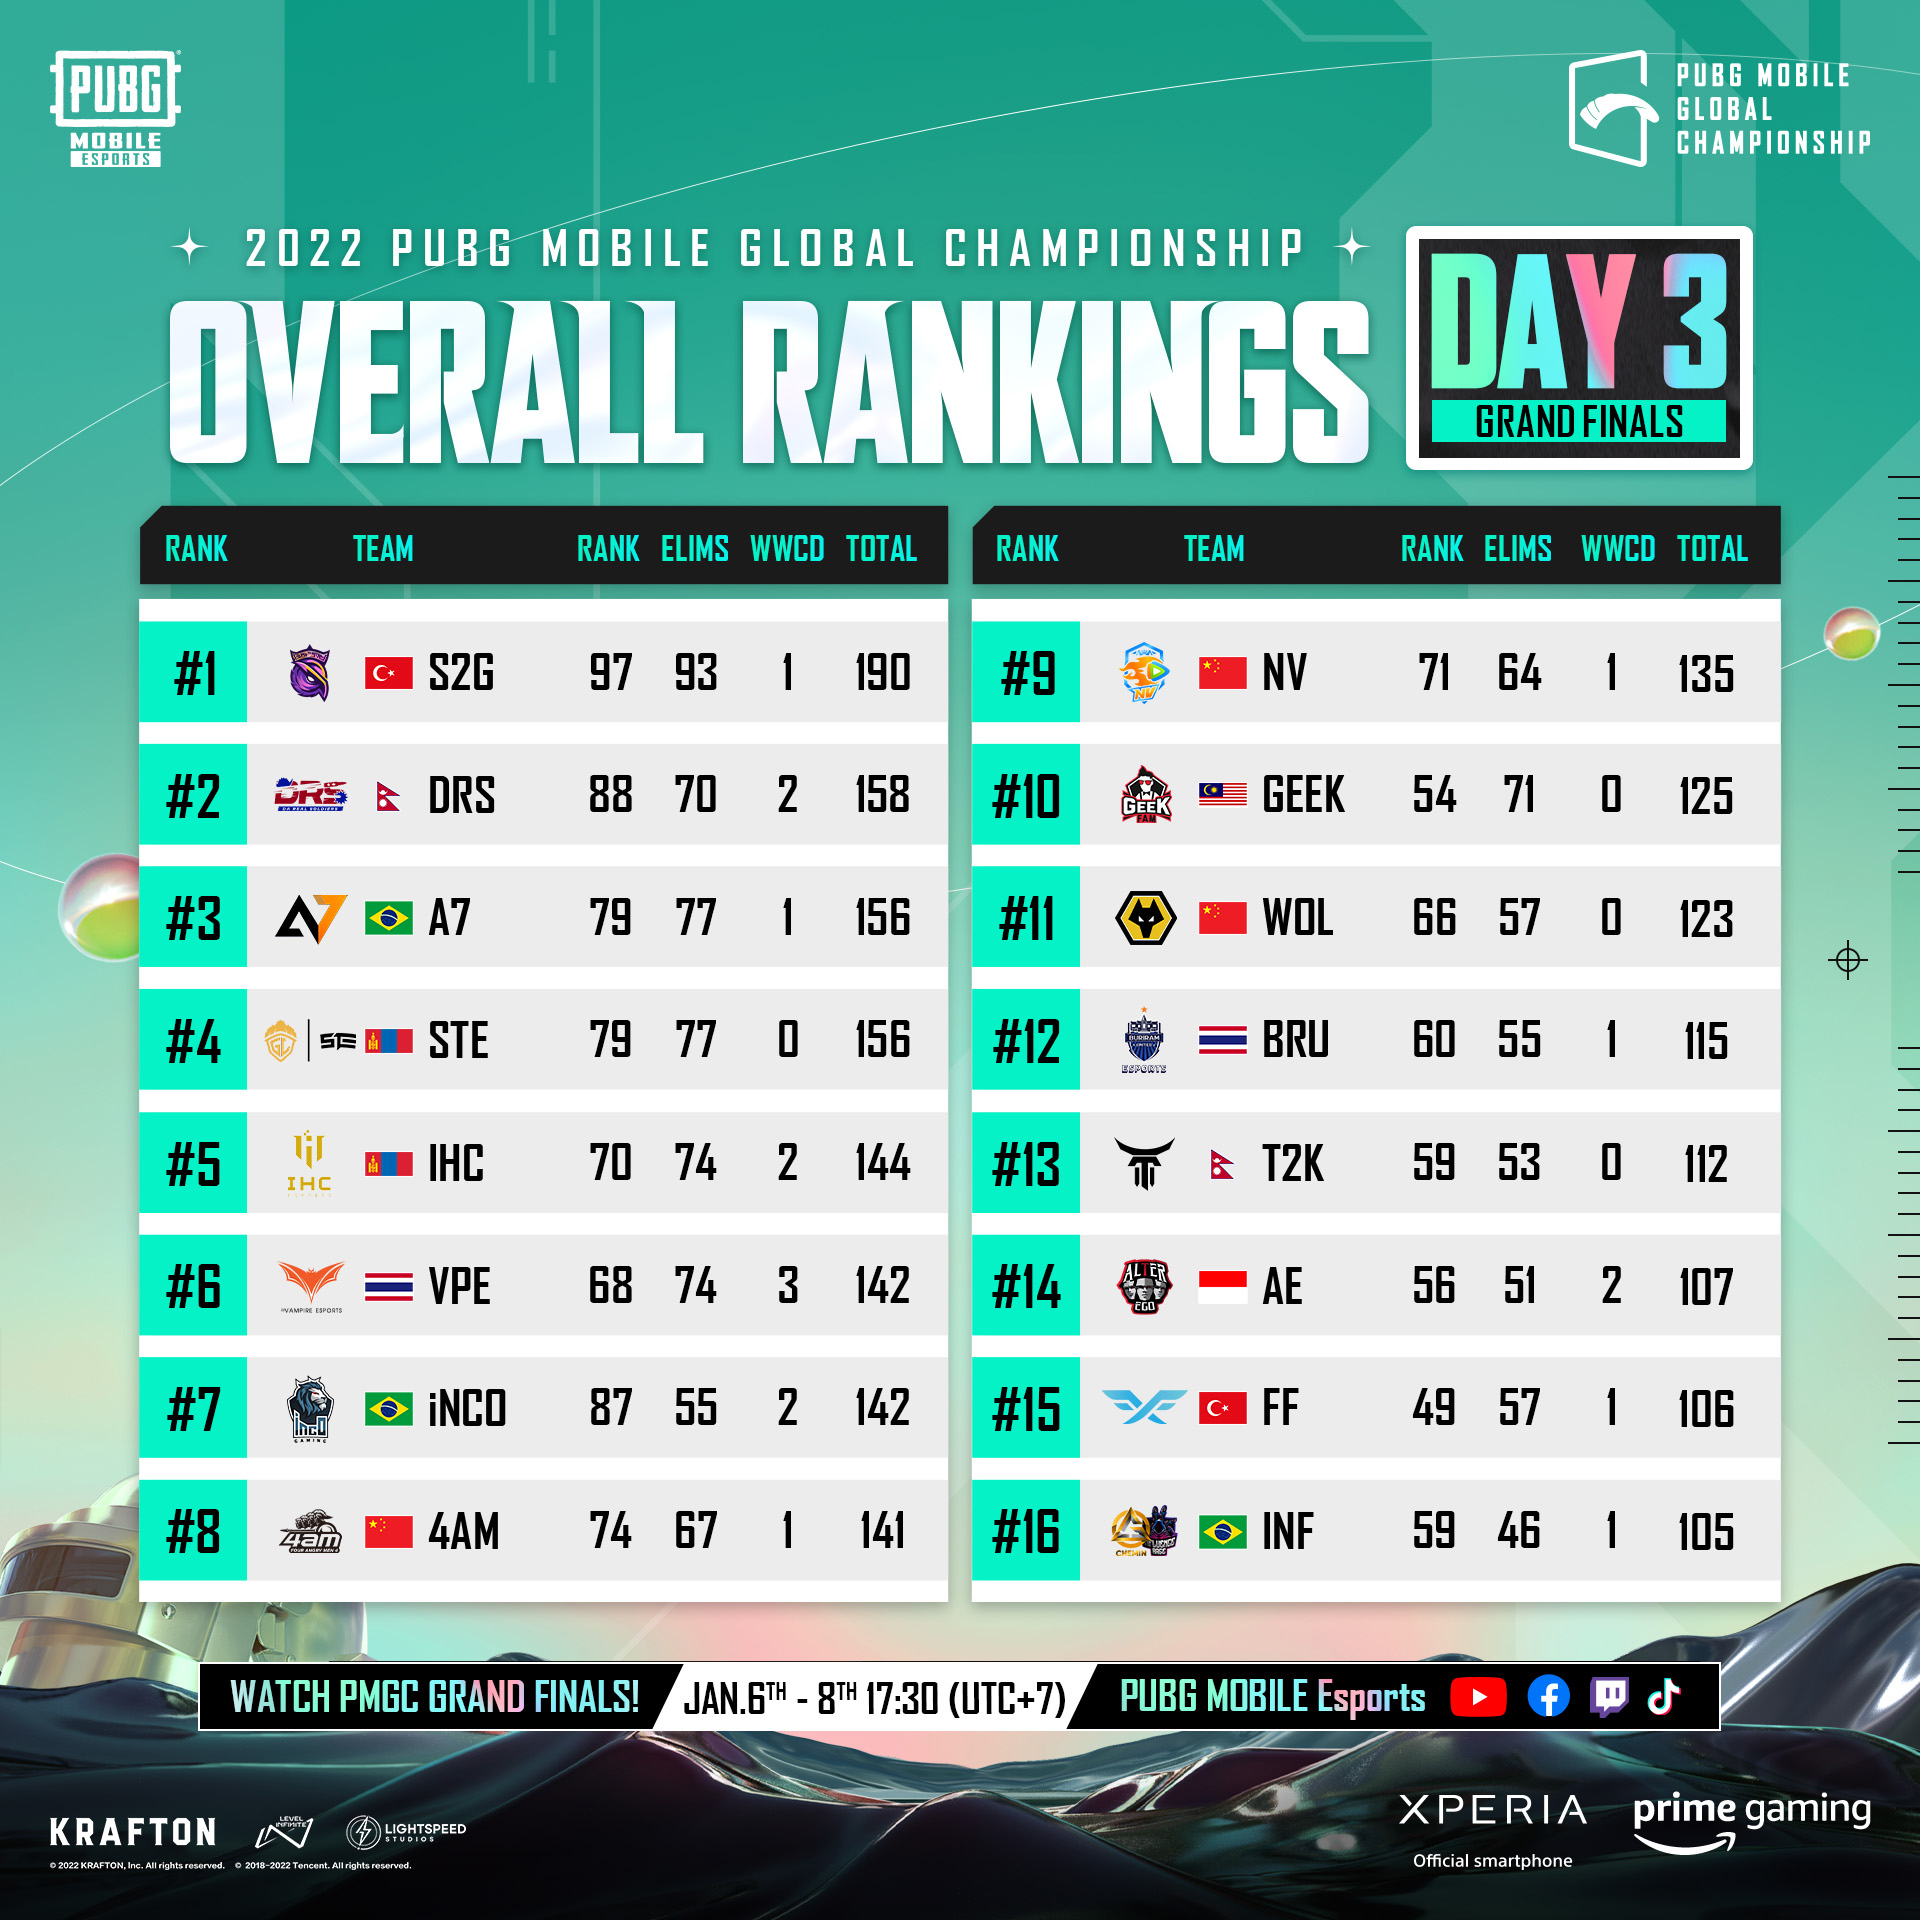 Overall ranking of PMGC 2022 Grand Finals Day 3